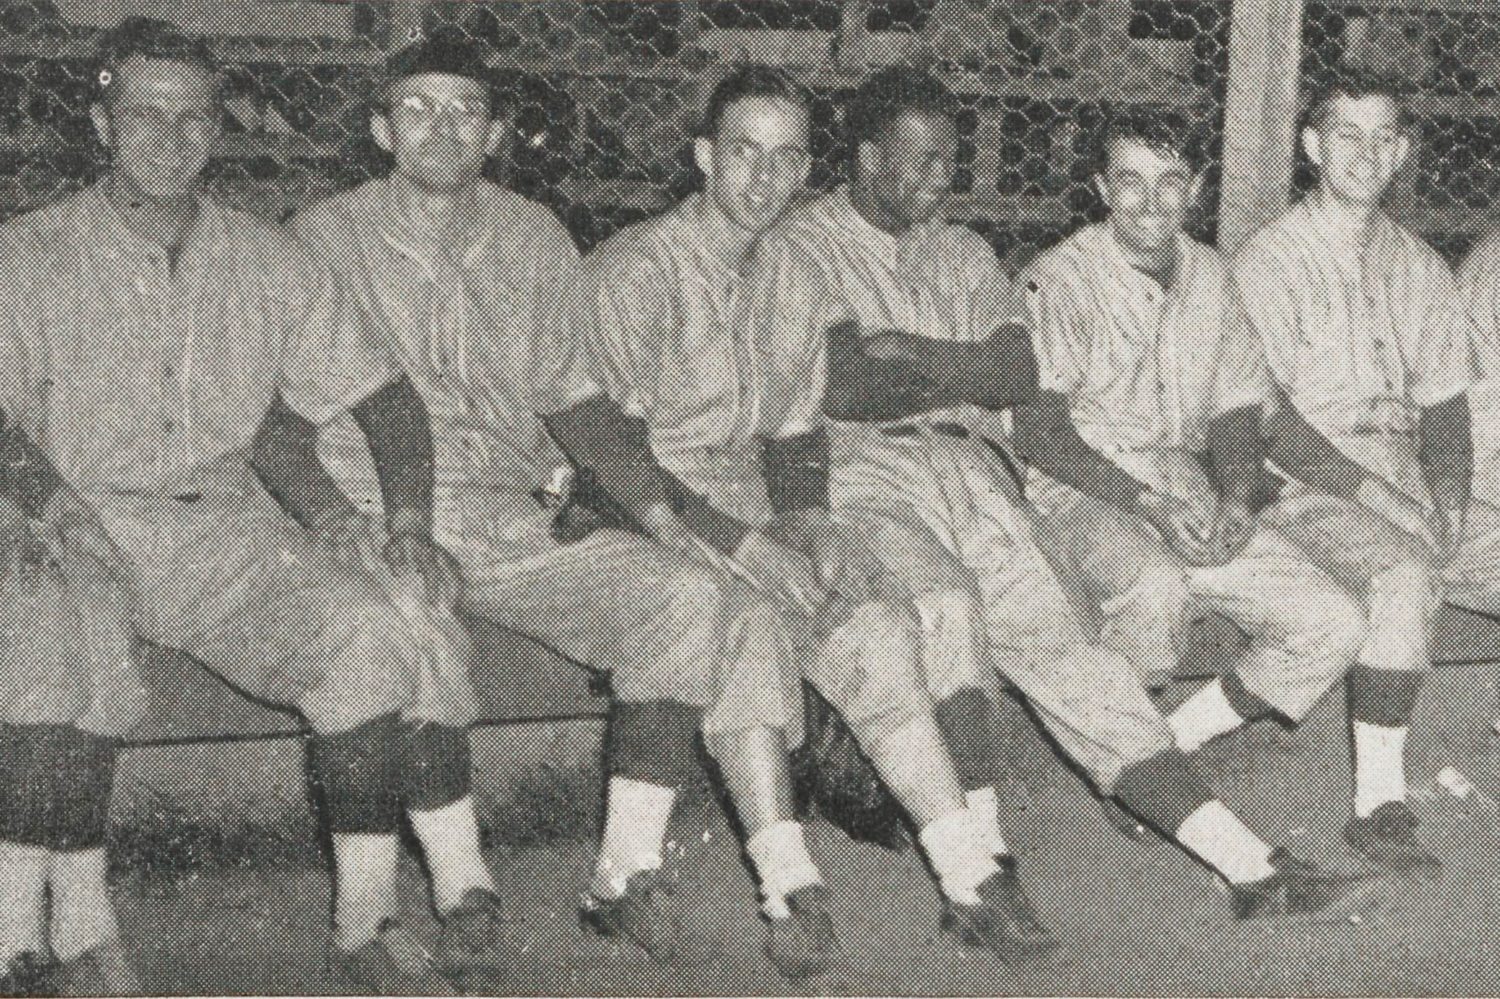 A photo of Willard Jones, HP's earliest-known Black employee, with the rest of the HP softball team in 1946.